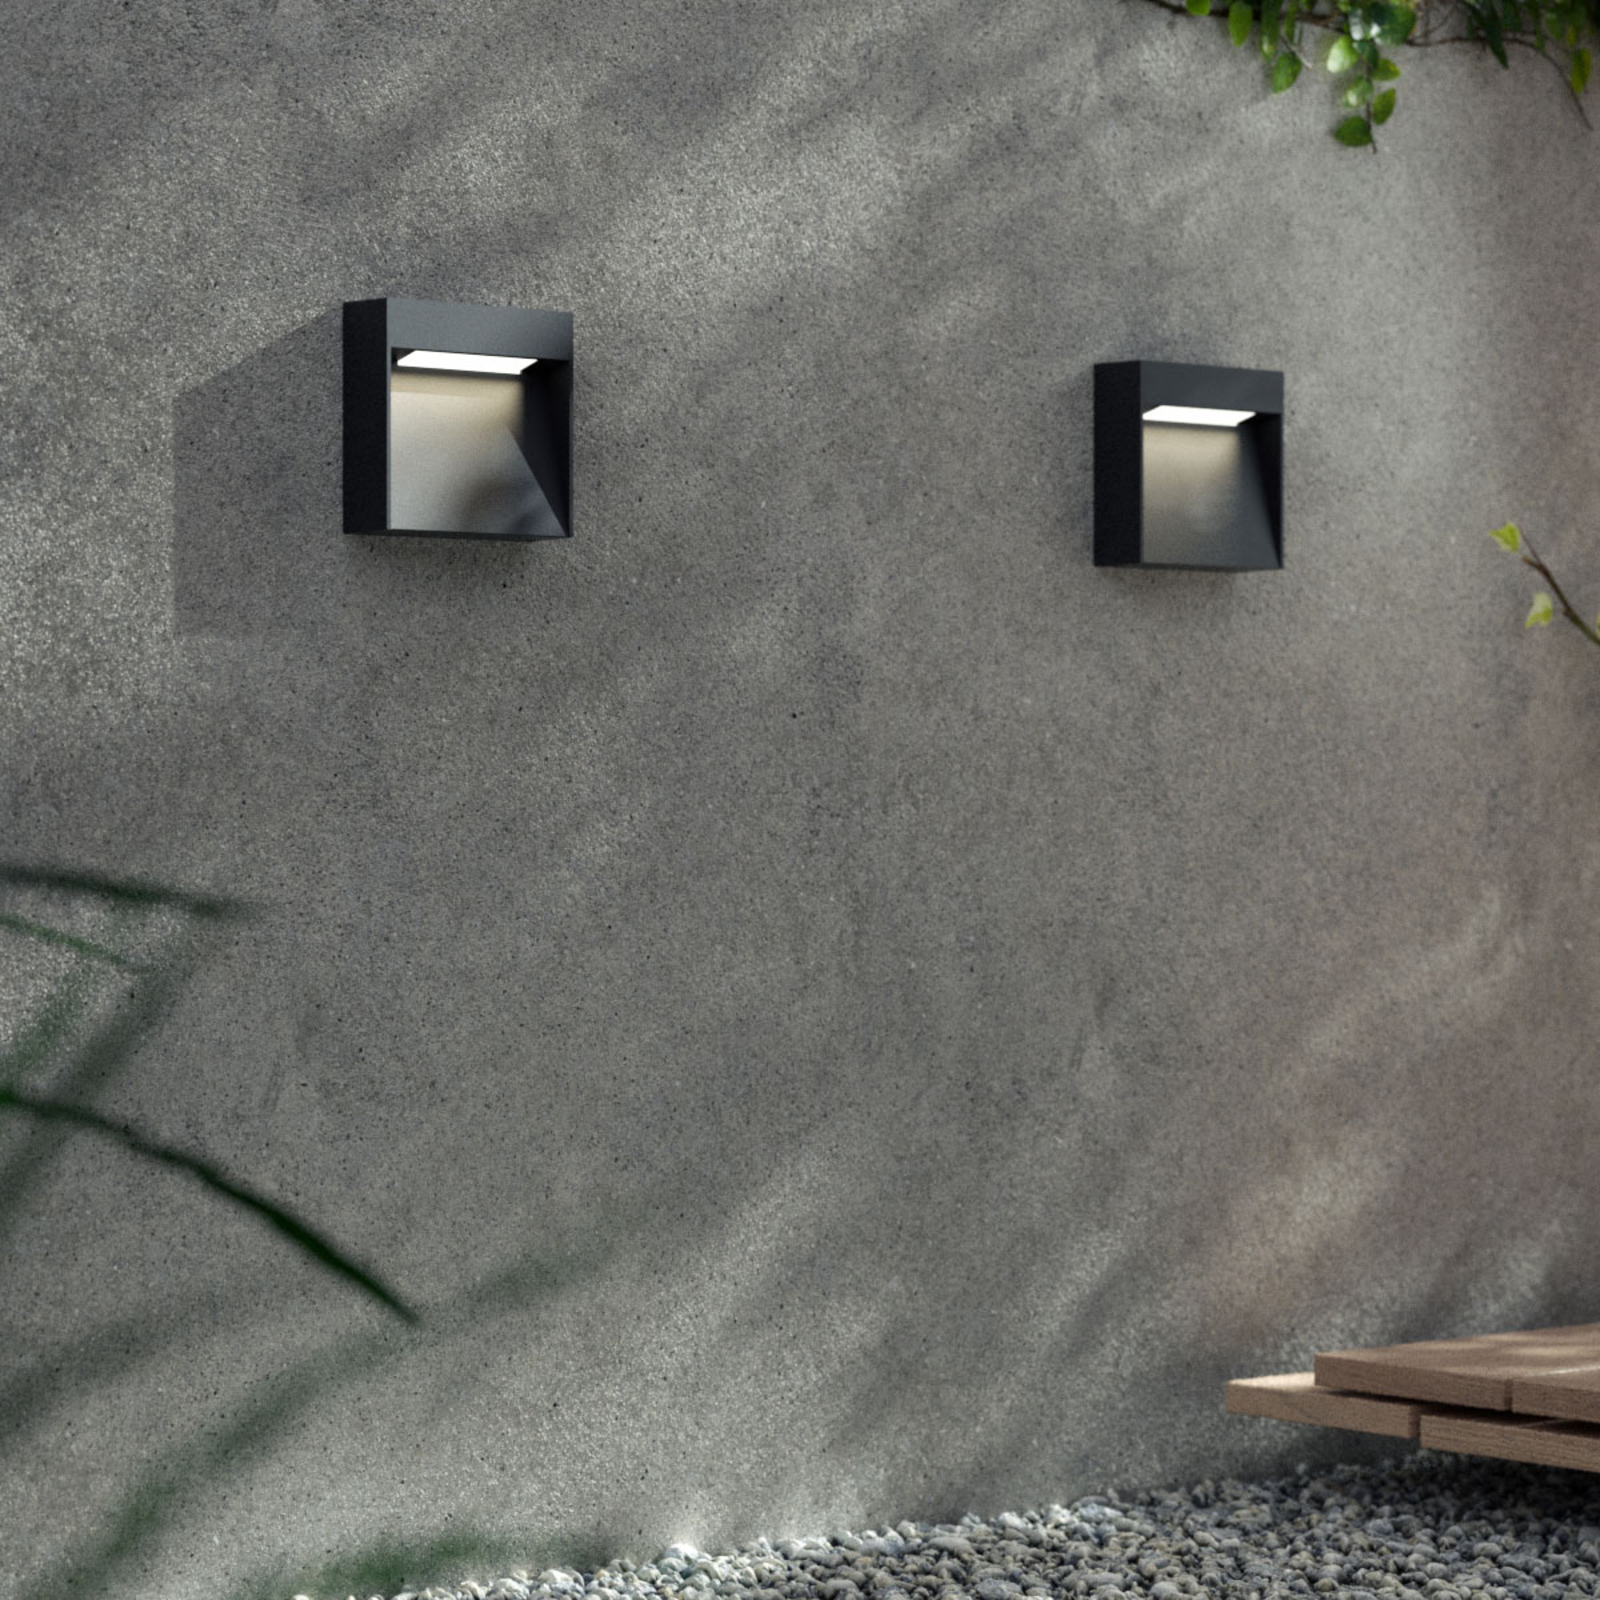 Bene - LED wall light for outdoor use